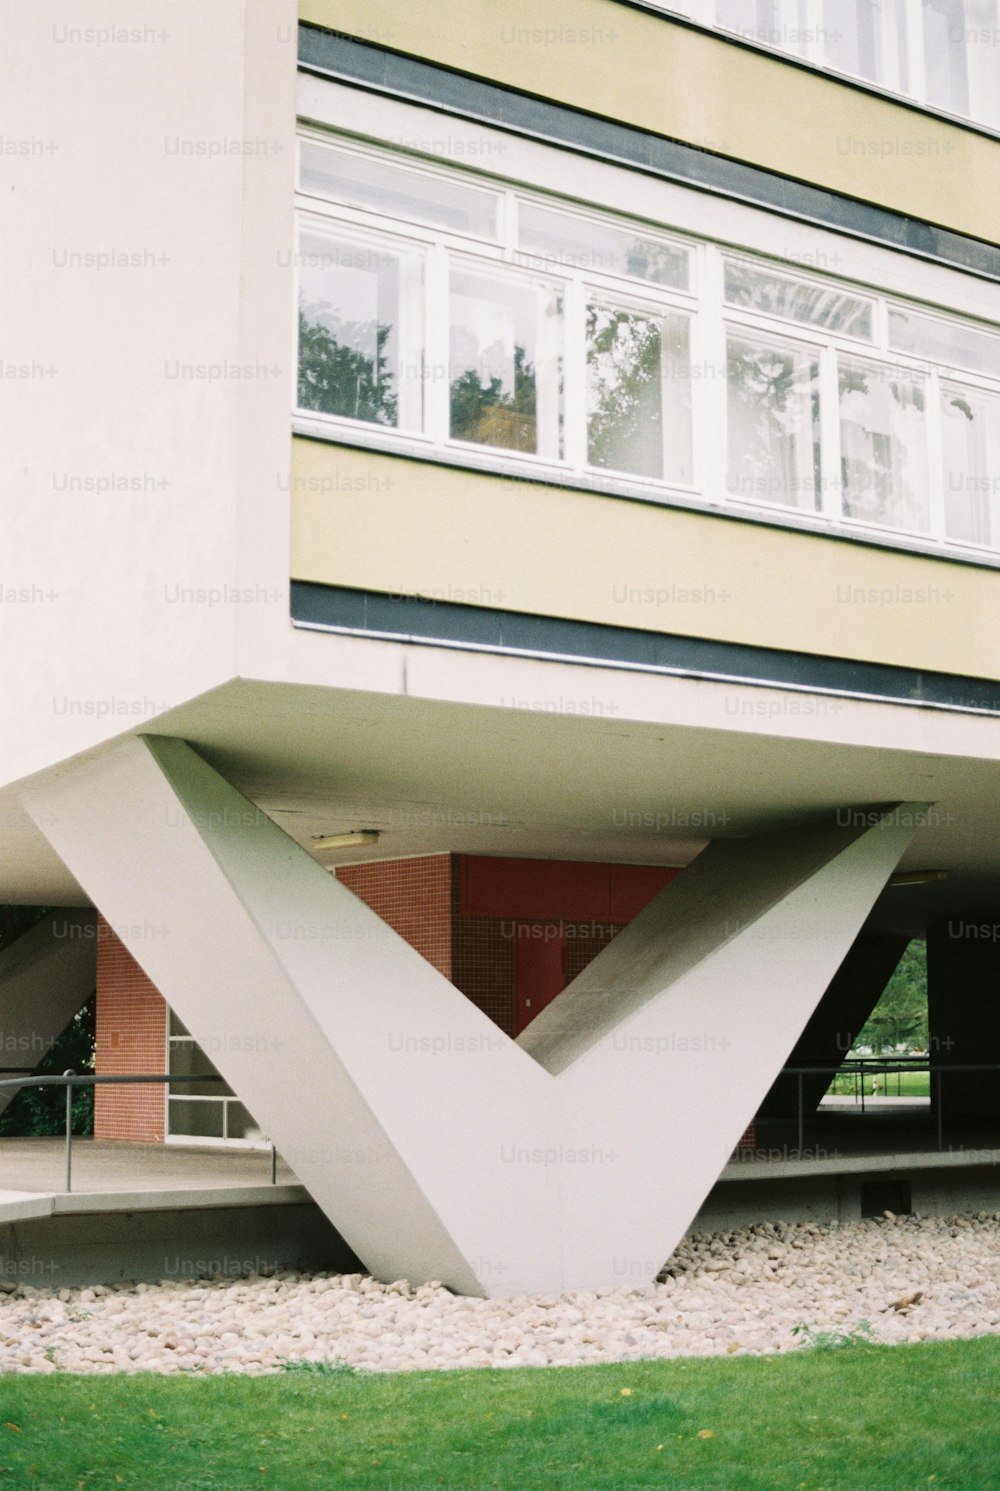 a building with a large triangular design in front of it